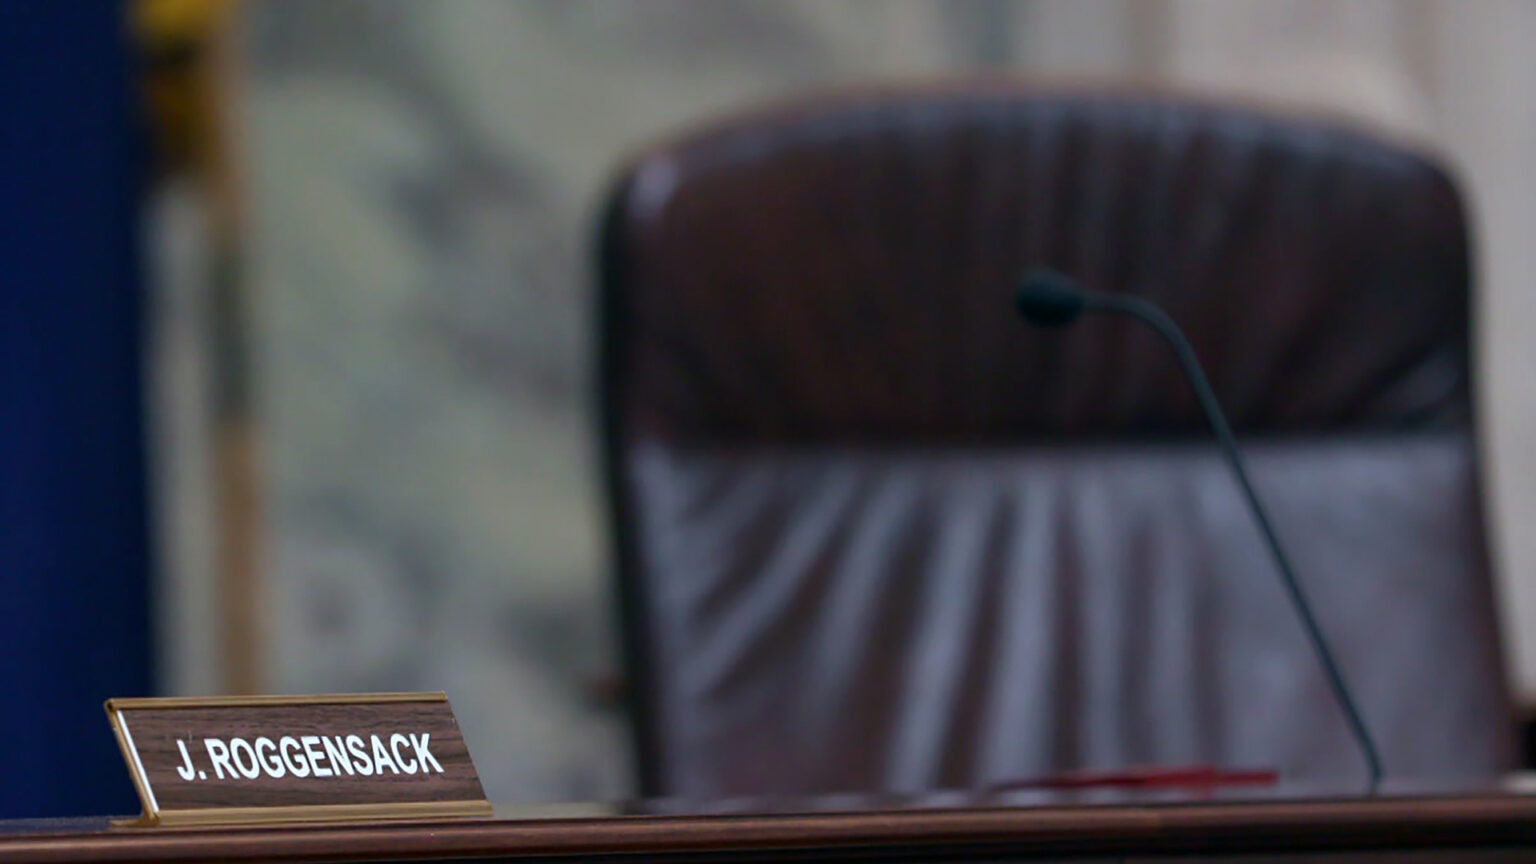 A nameplate reading J. Roggensack sits atop a wood judicial dais, with an out-of-focus microphone and high-backed leather chair in the background.